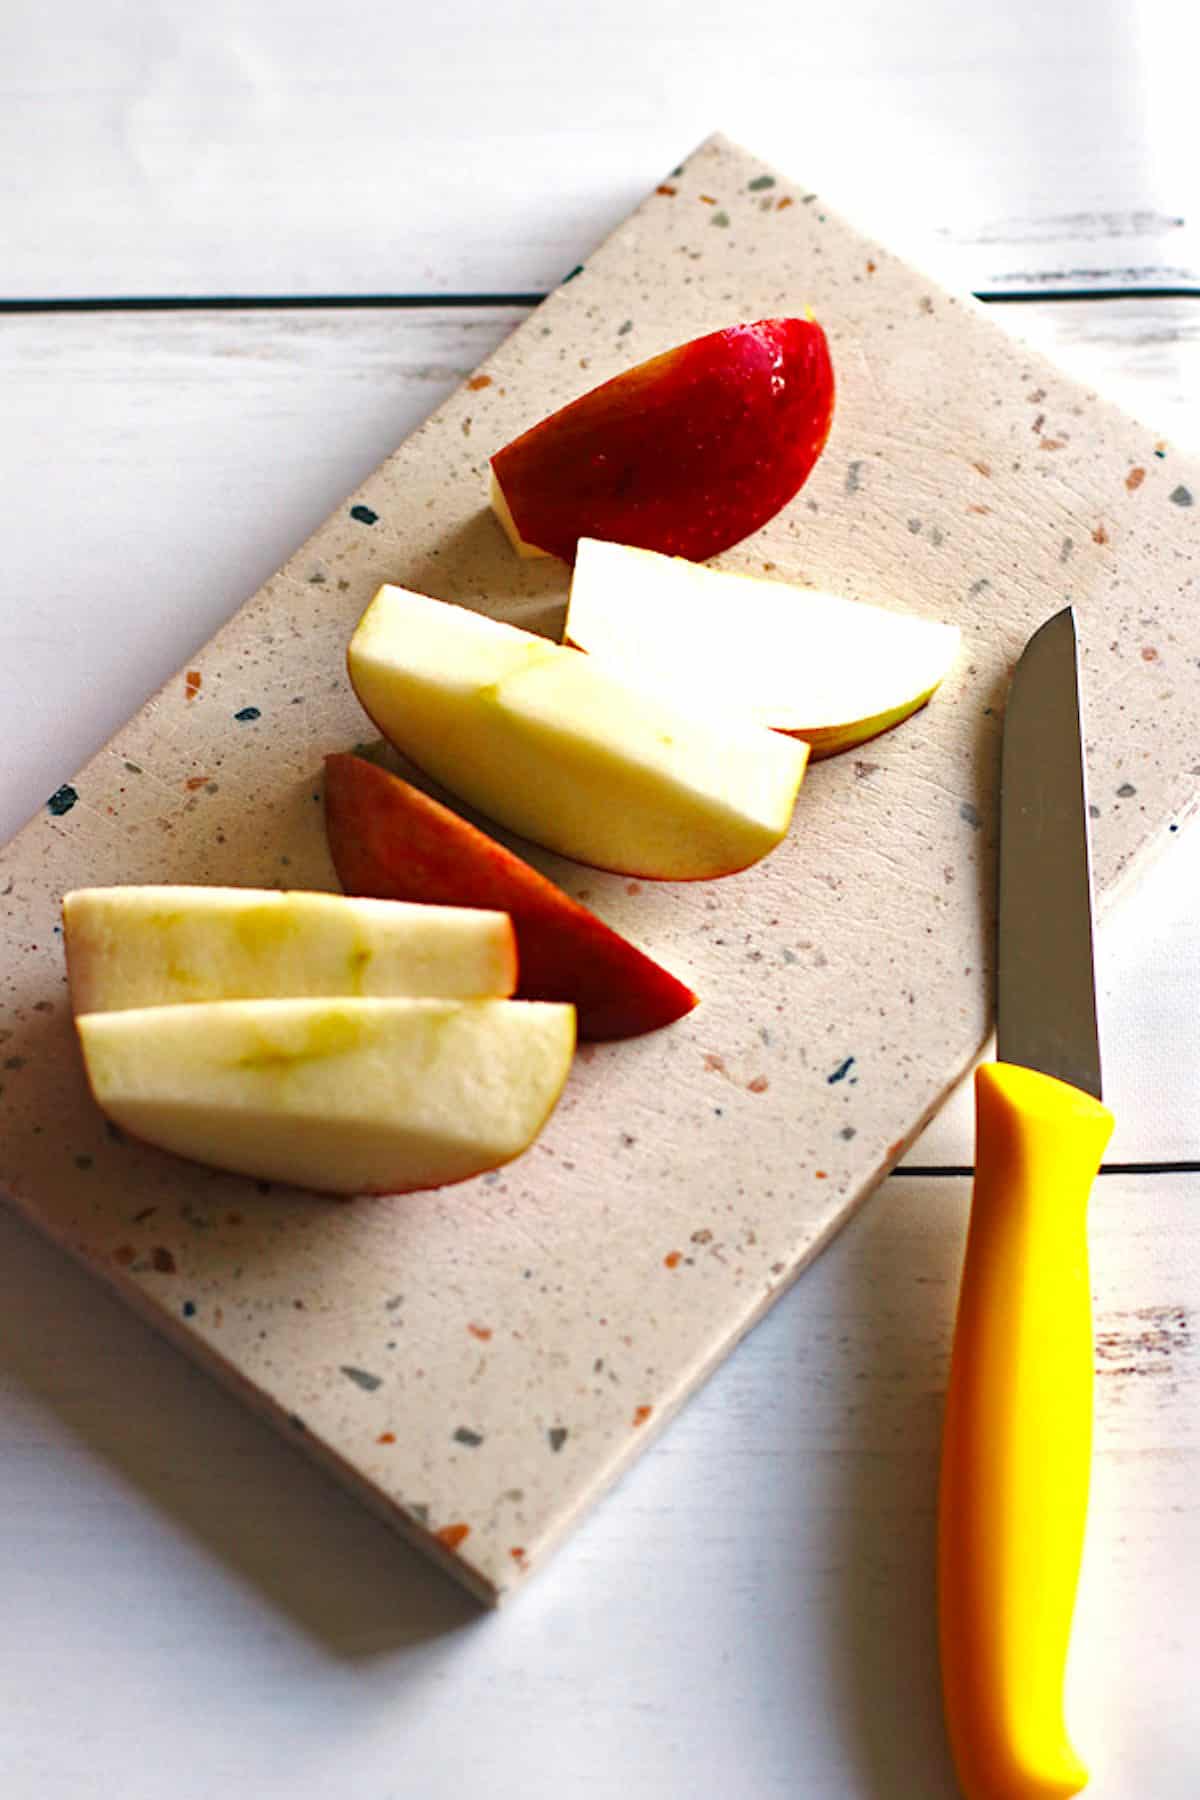 An apple sliced into medium pieces on a cutting board with a knife